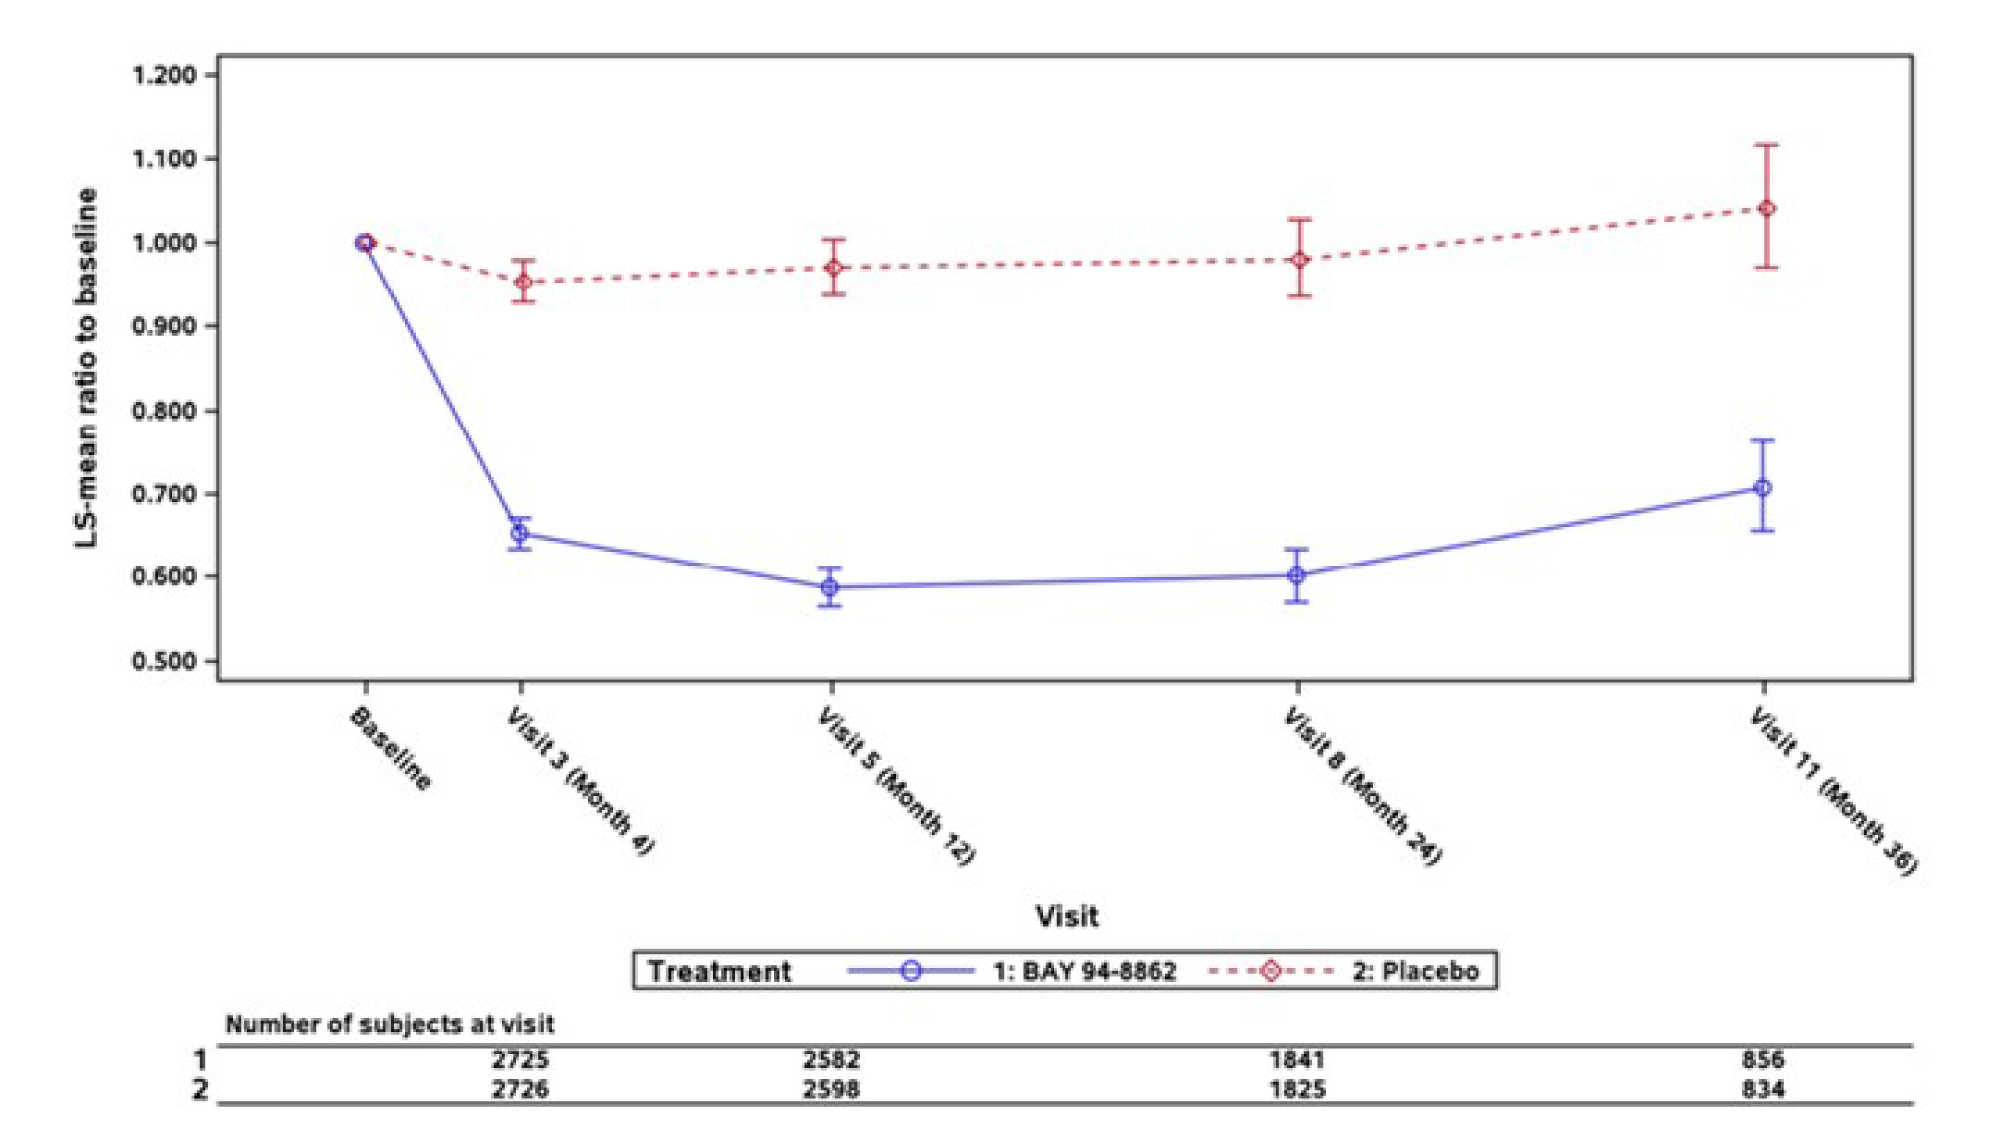 In this line plot for FIDELIO, the 2 curves representing the LS means of eGFR absolute changes from baseline start at the same point at baseline. After baseline, the finerenone curve drastically decreases to month 4 compared with the placebo curve, which remains relatively stable. After month 4, the curves remain stable, with the finerenone curve much lower than the placebo curve, indicating the effect of finerenone is sustained for the duration of the study until month 36.